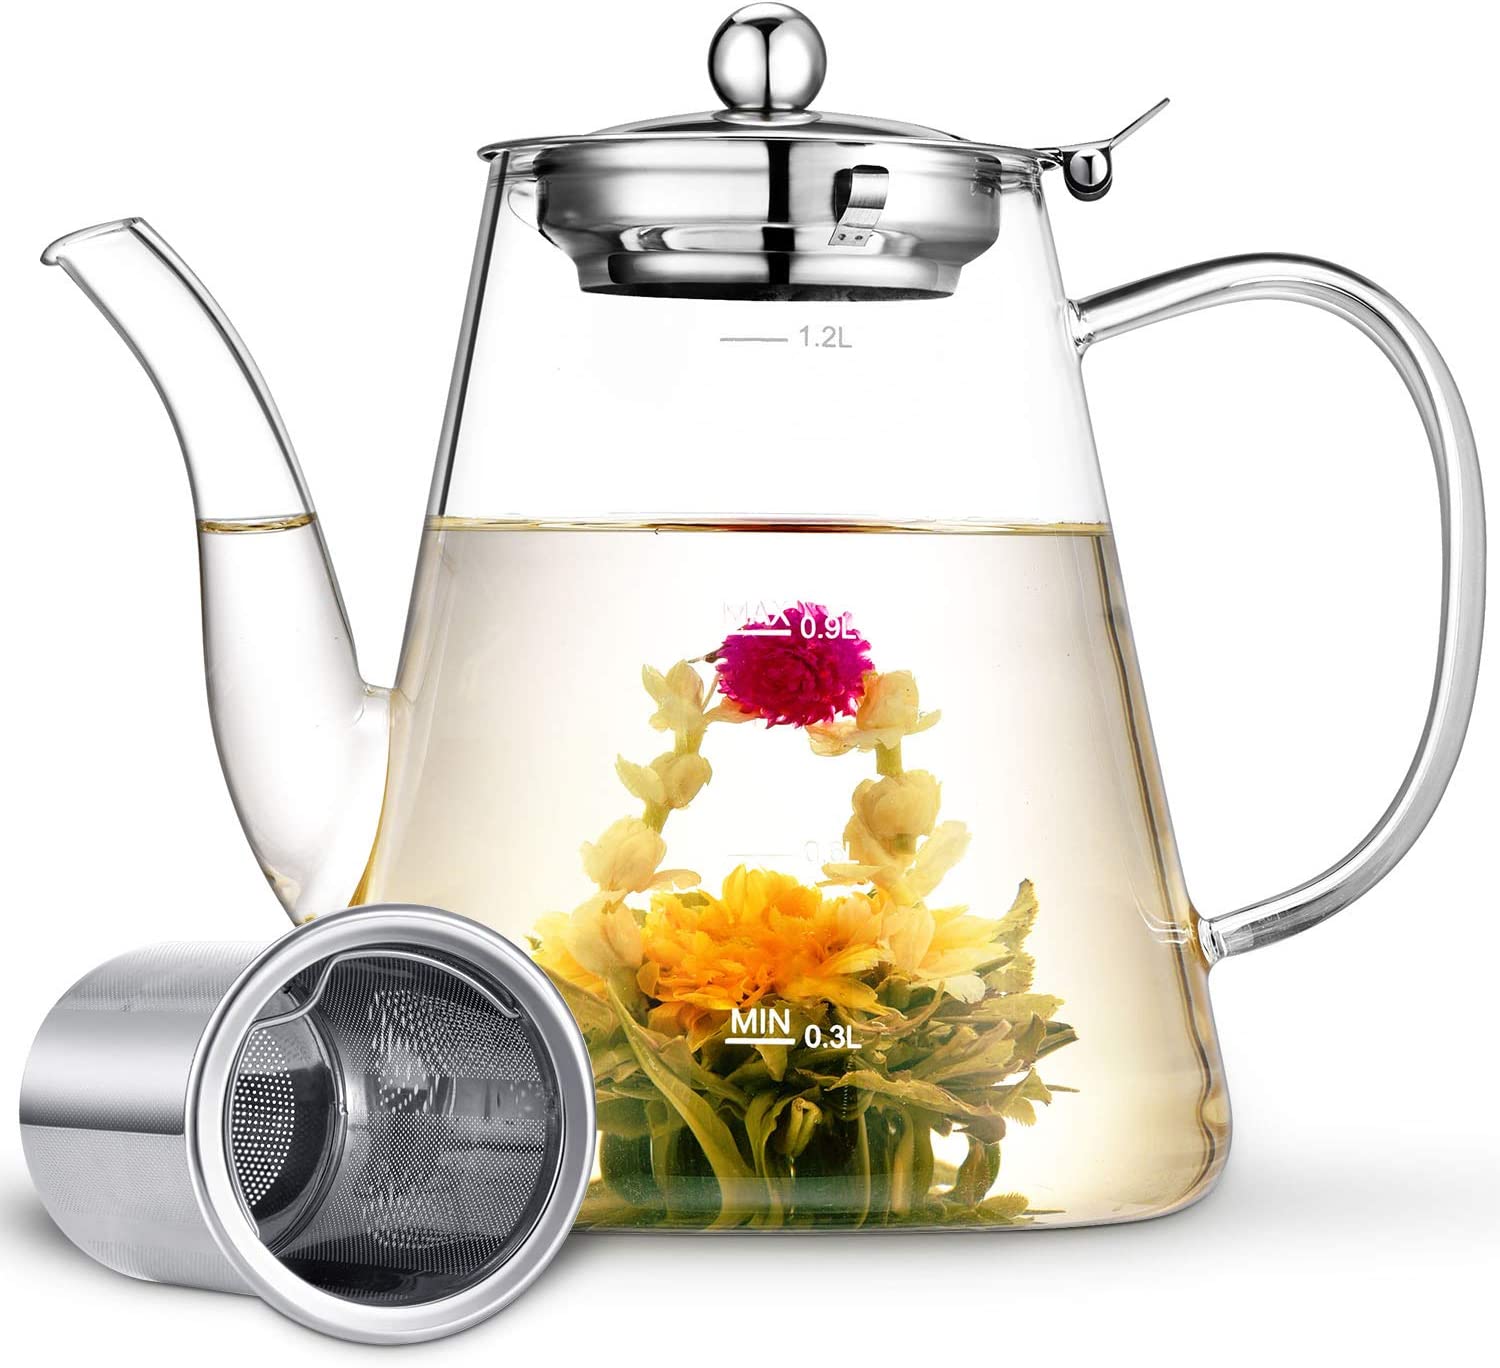 Zpose Teapot Glass, Borosilicate Glass Teapots 1200 ml with Scale Line, Teapot with 304 Rustproof Stainless Steel Strainer Insert, Removable, Glass Teapots for Loose Tea, Blossom Tea, etc